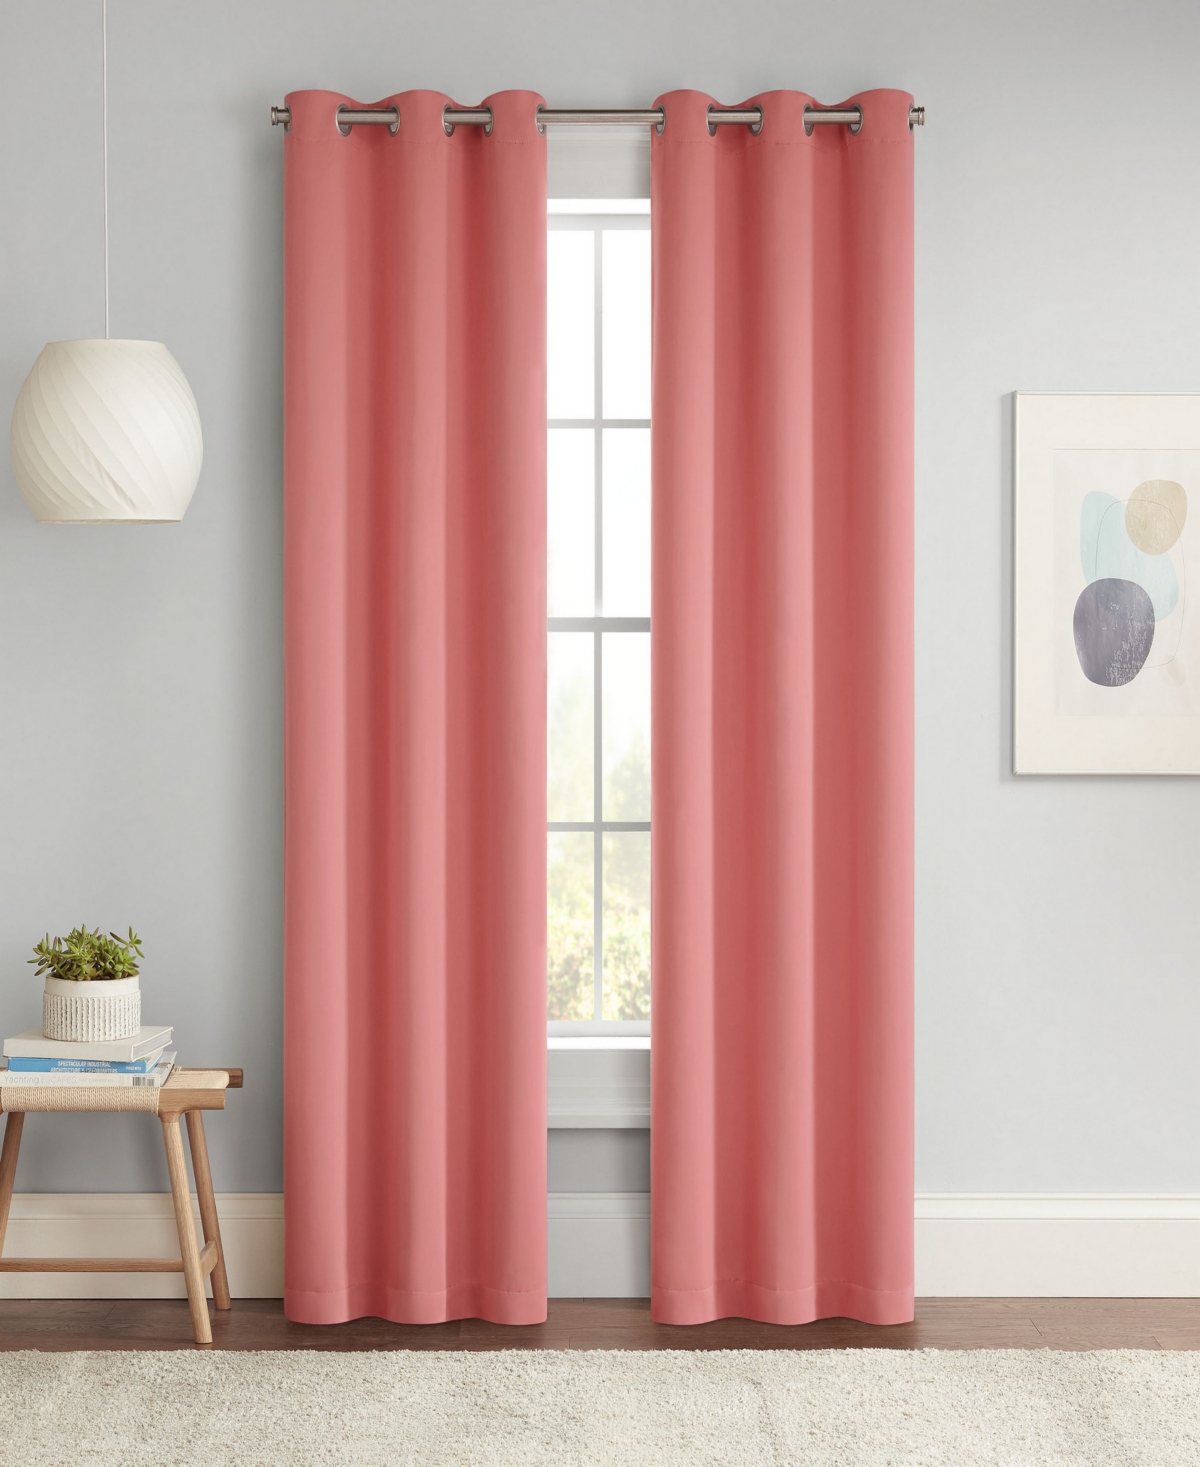 Eclipse Darrell Energy Saving Blackout Grommet Curtain Panel, 84" X 37" In Coral